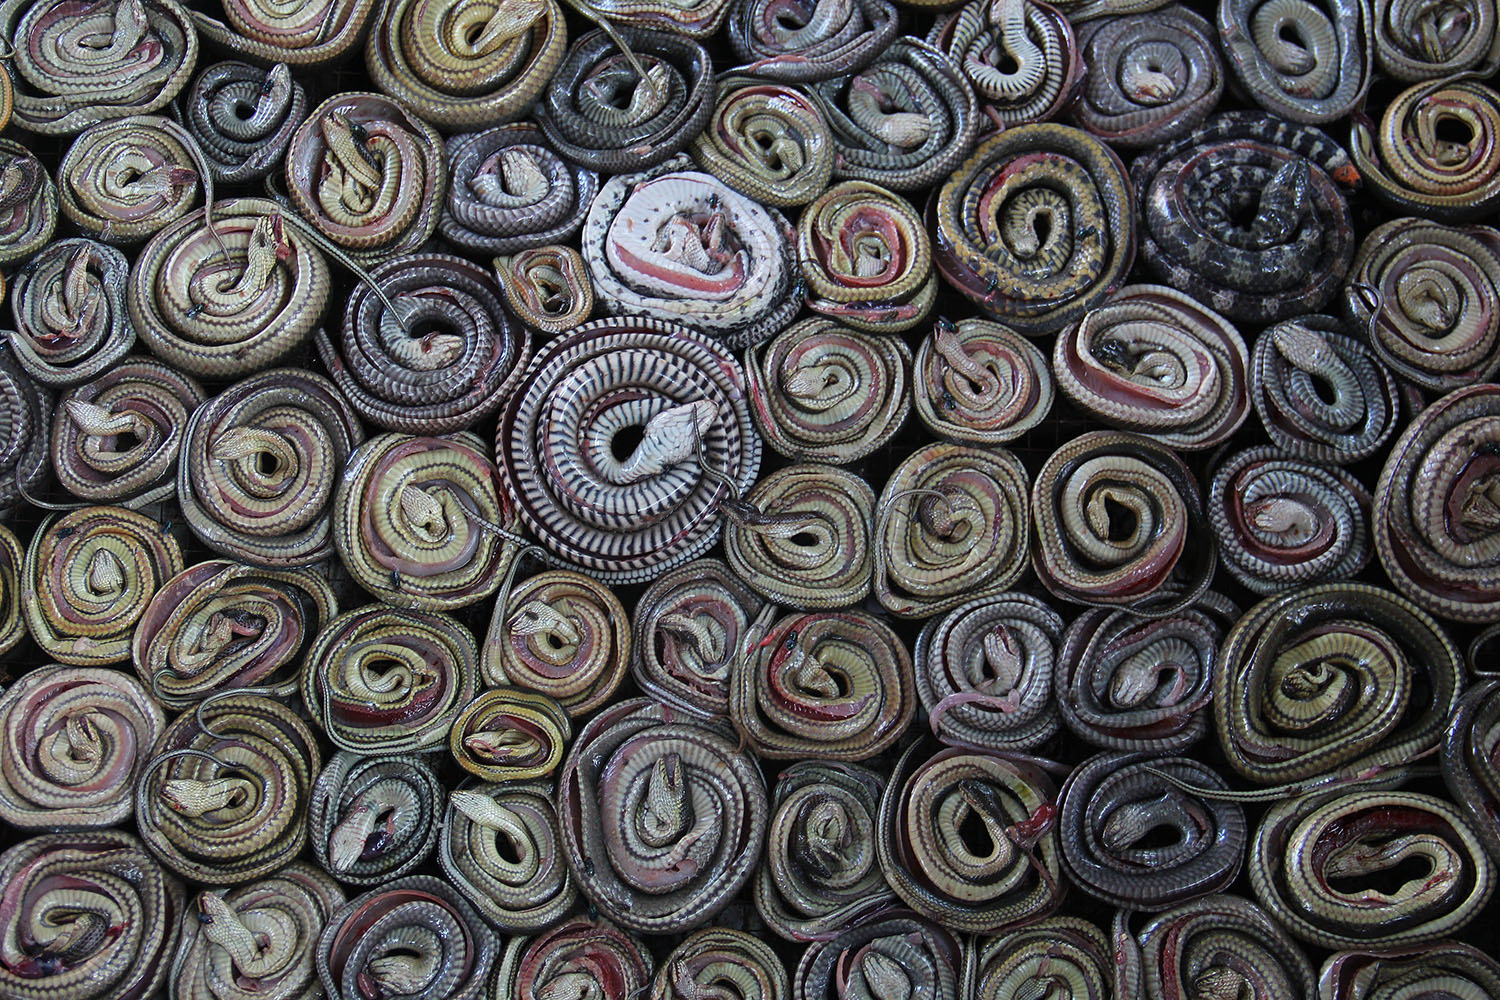 Mar. 2, 2014. Snakes are collected and rolled before being put into the oven in the village of Kertasura, Cirebon, Indonesia. Snake skins  are sold to bag factories in the West and Central Java provinces on a monthly basis.